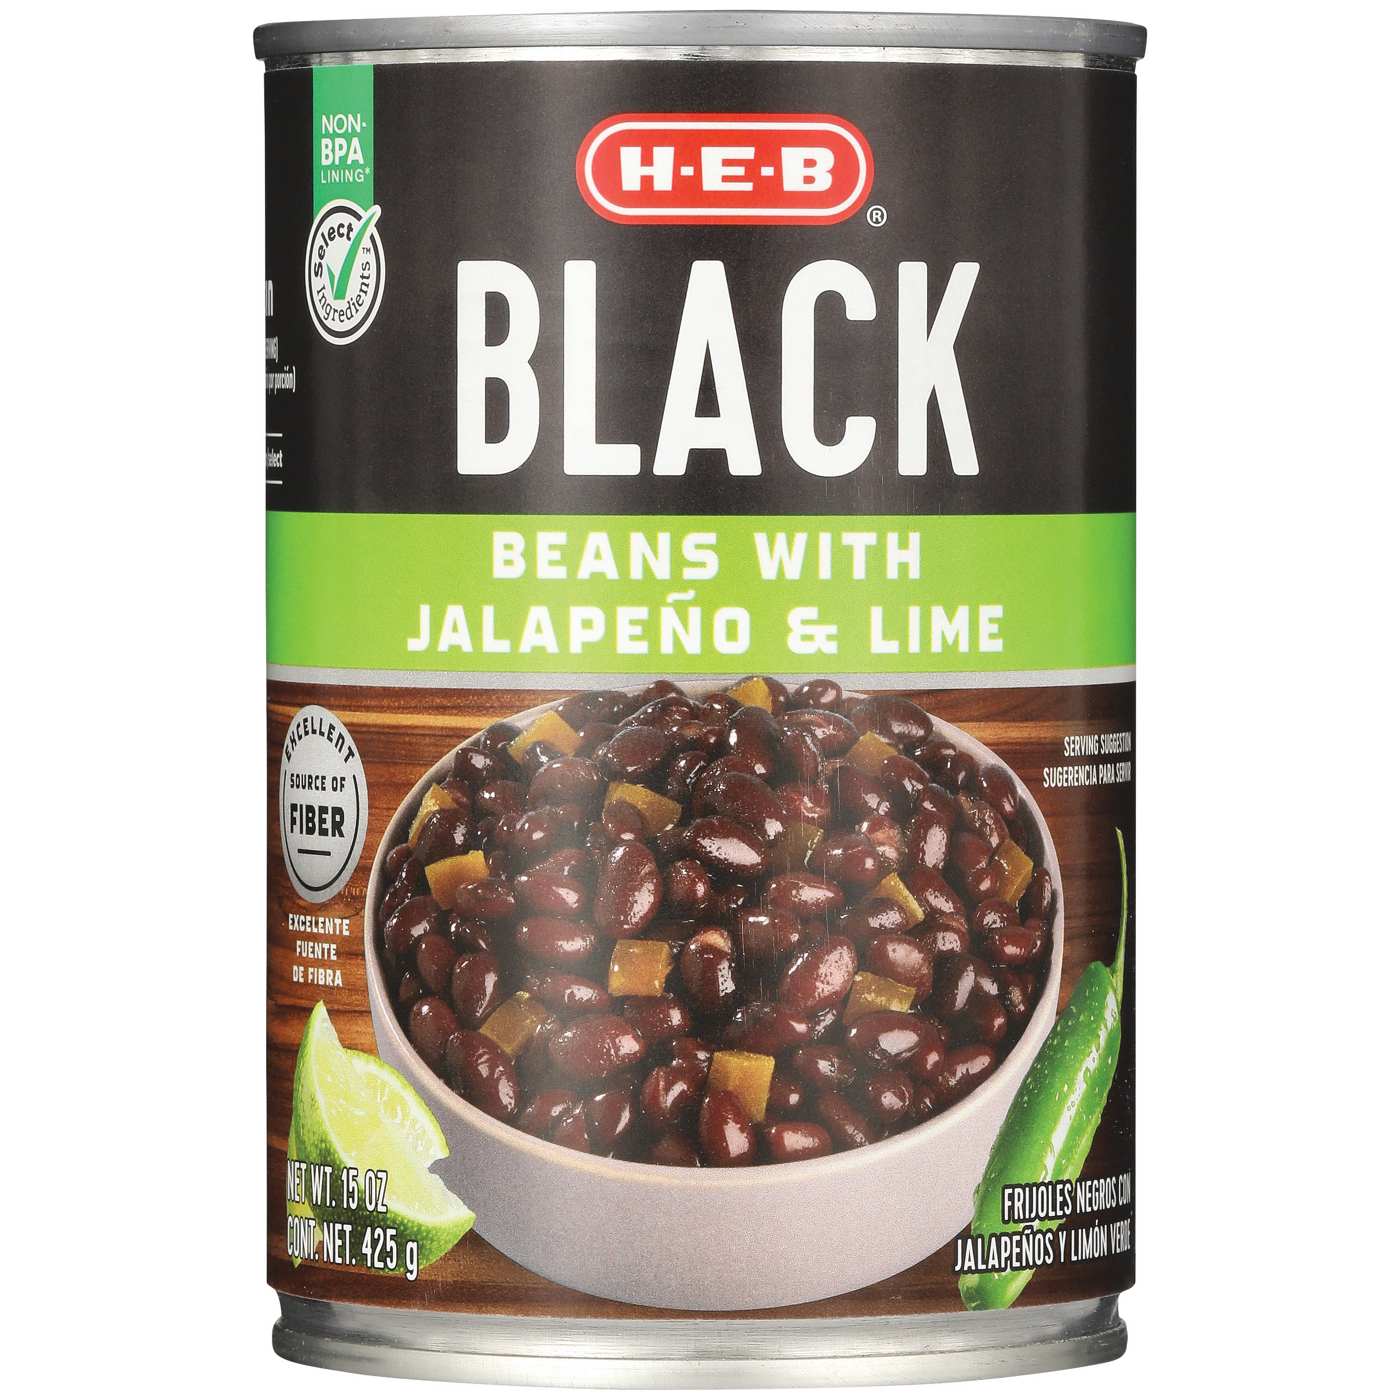 H-E-B Black Beans With Lime & Jalapenos; image 1 of 2